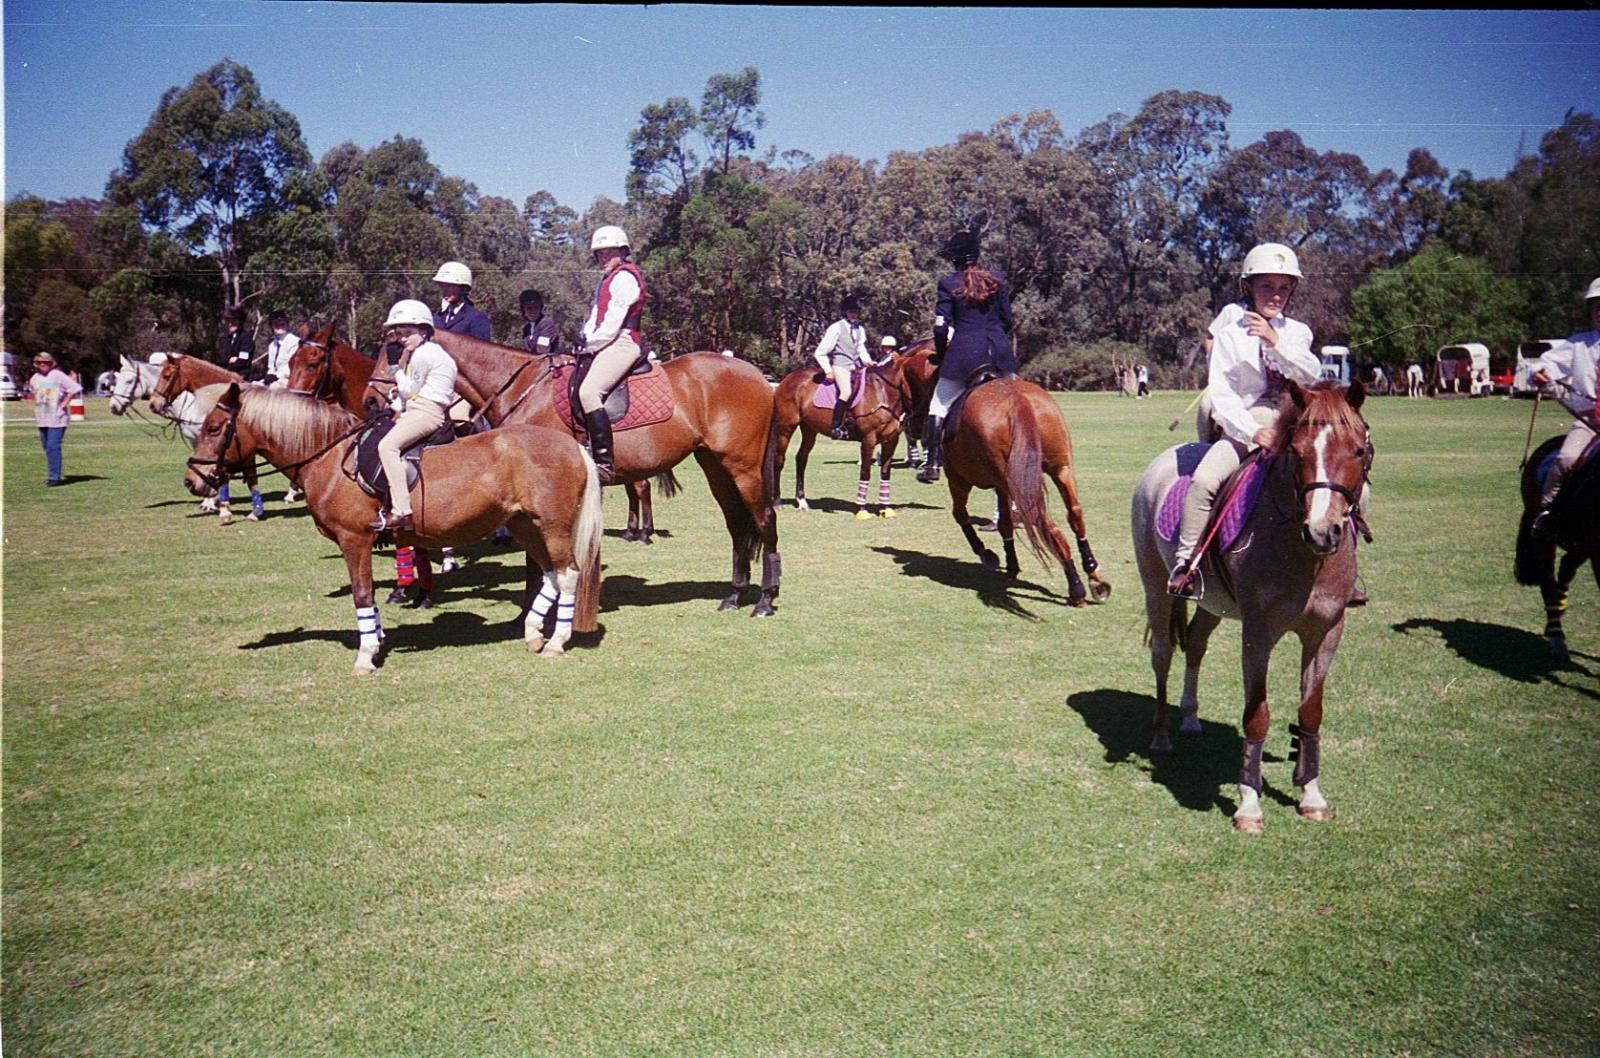 Horse riding at the show 1997